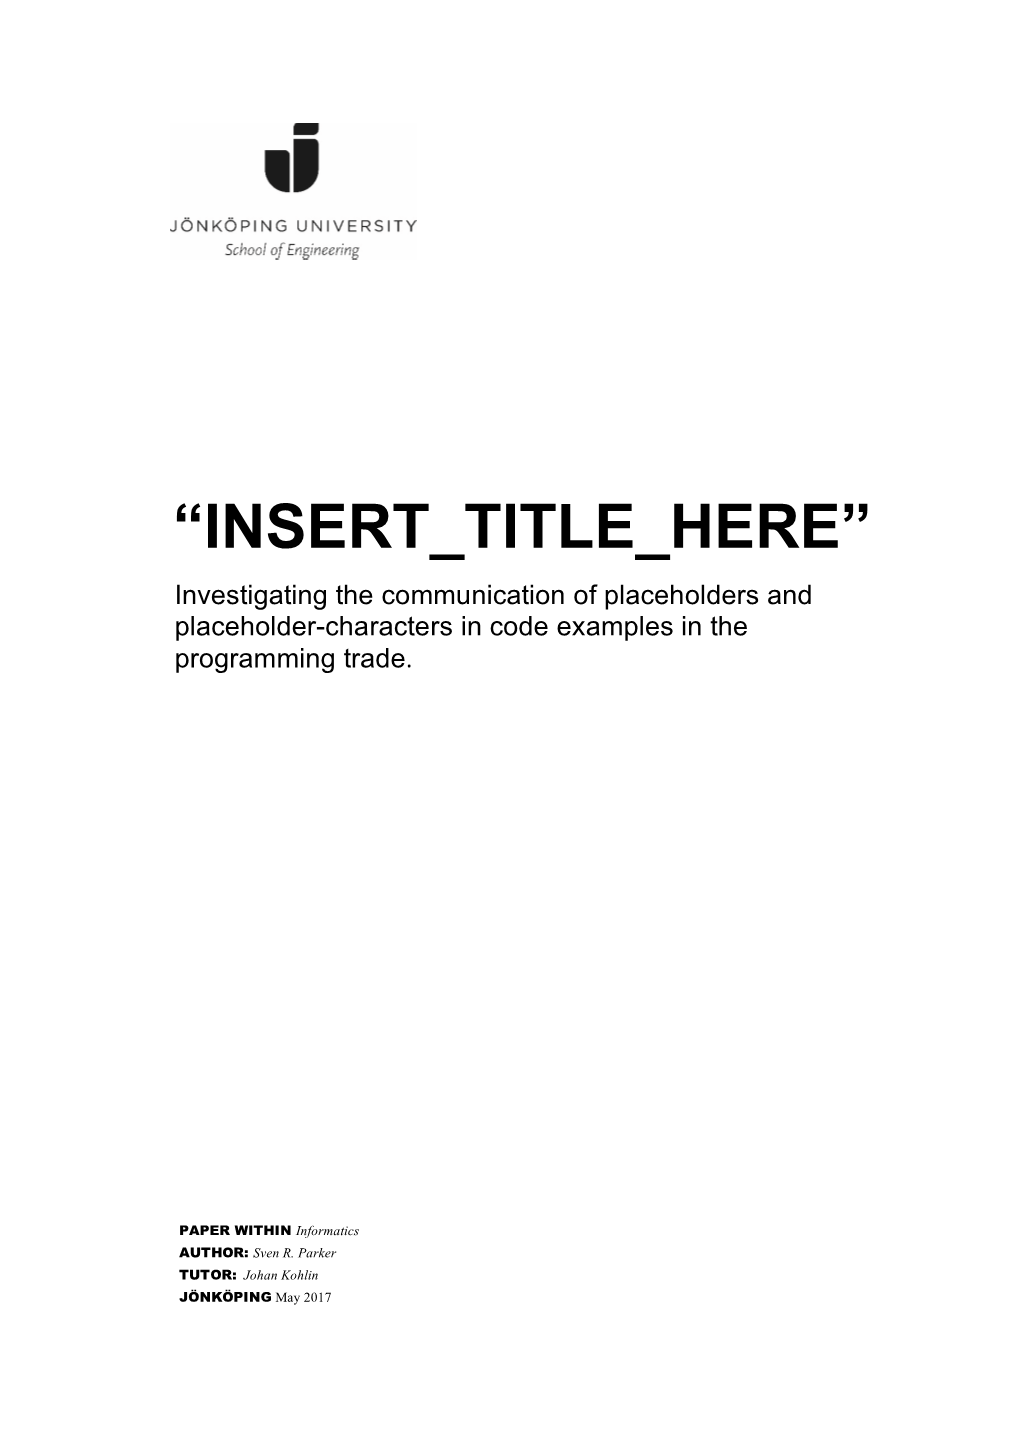 “INSERT TITLE HERE” Investigating the Communication of Placeholders and Placeholder-Characters in Code Examples in the Programming Trade